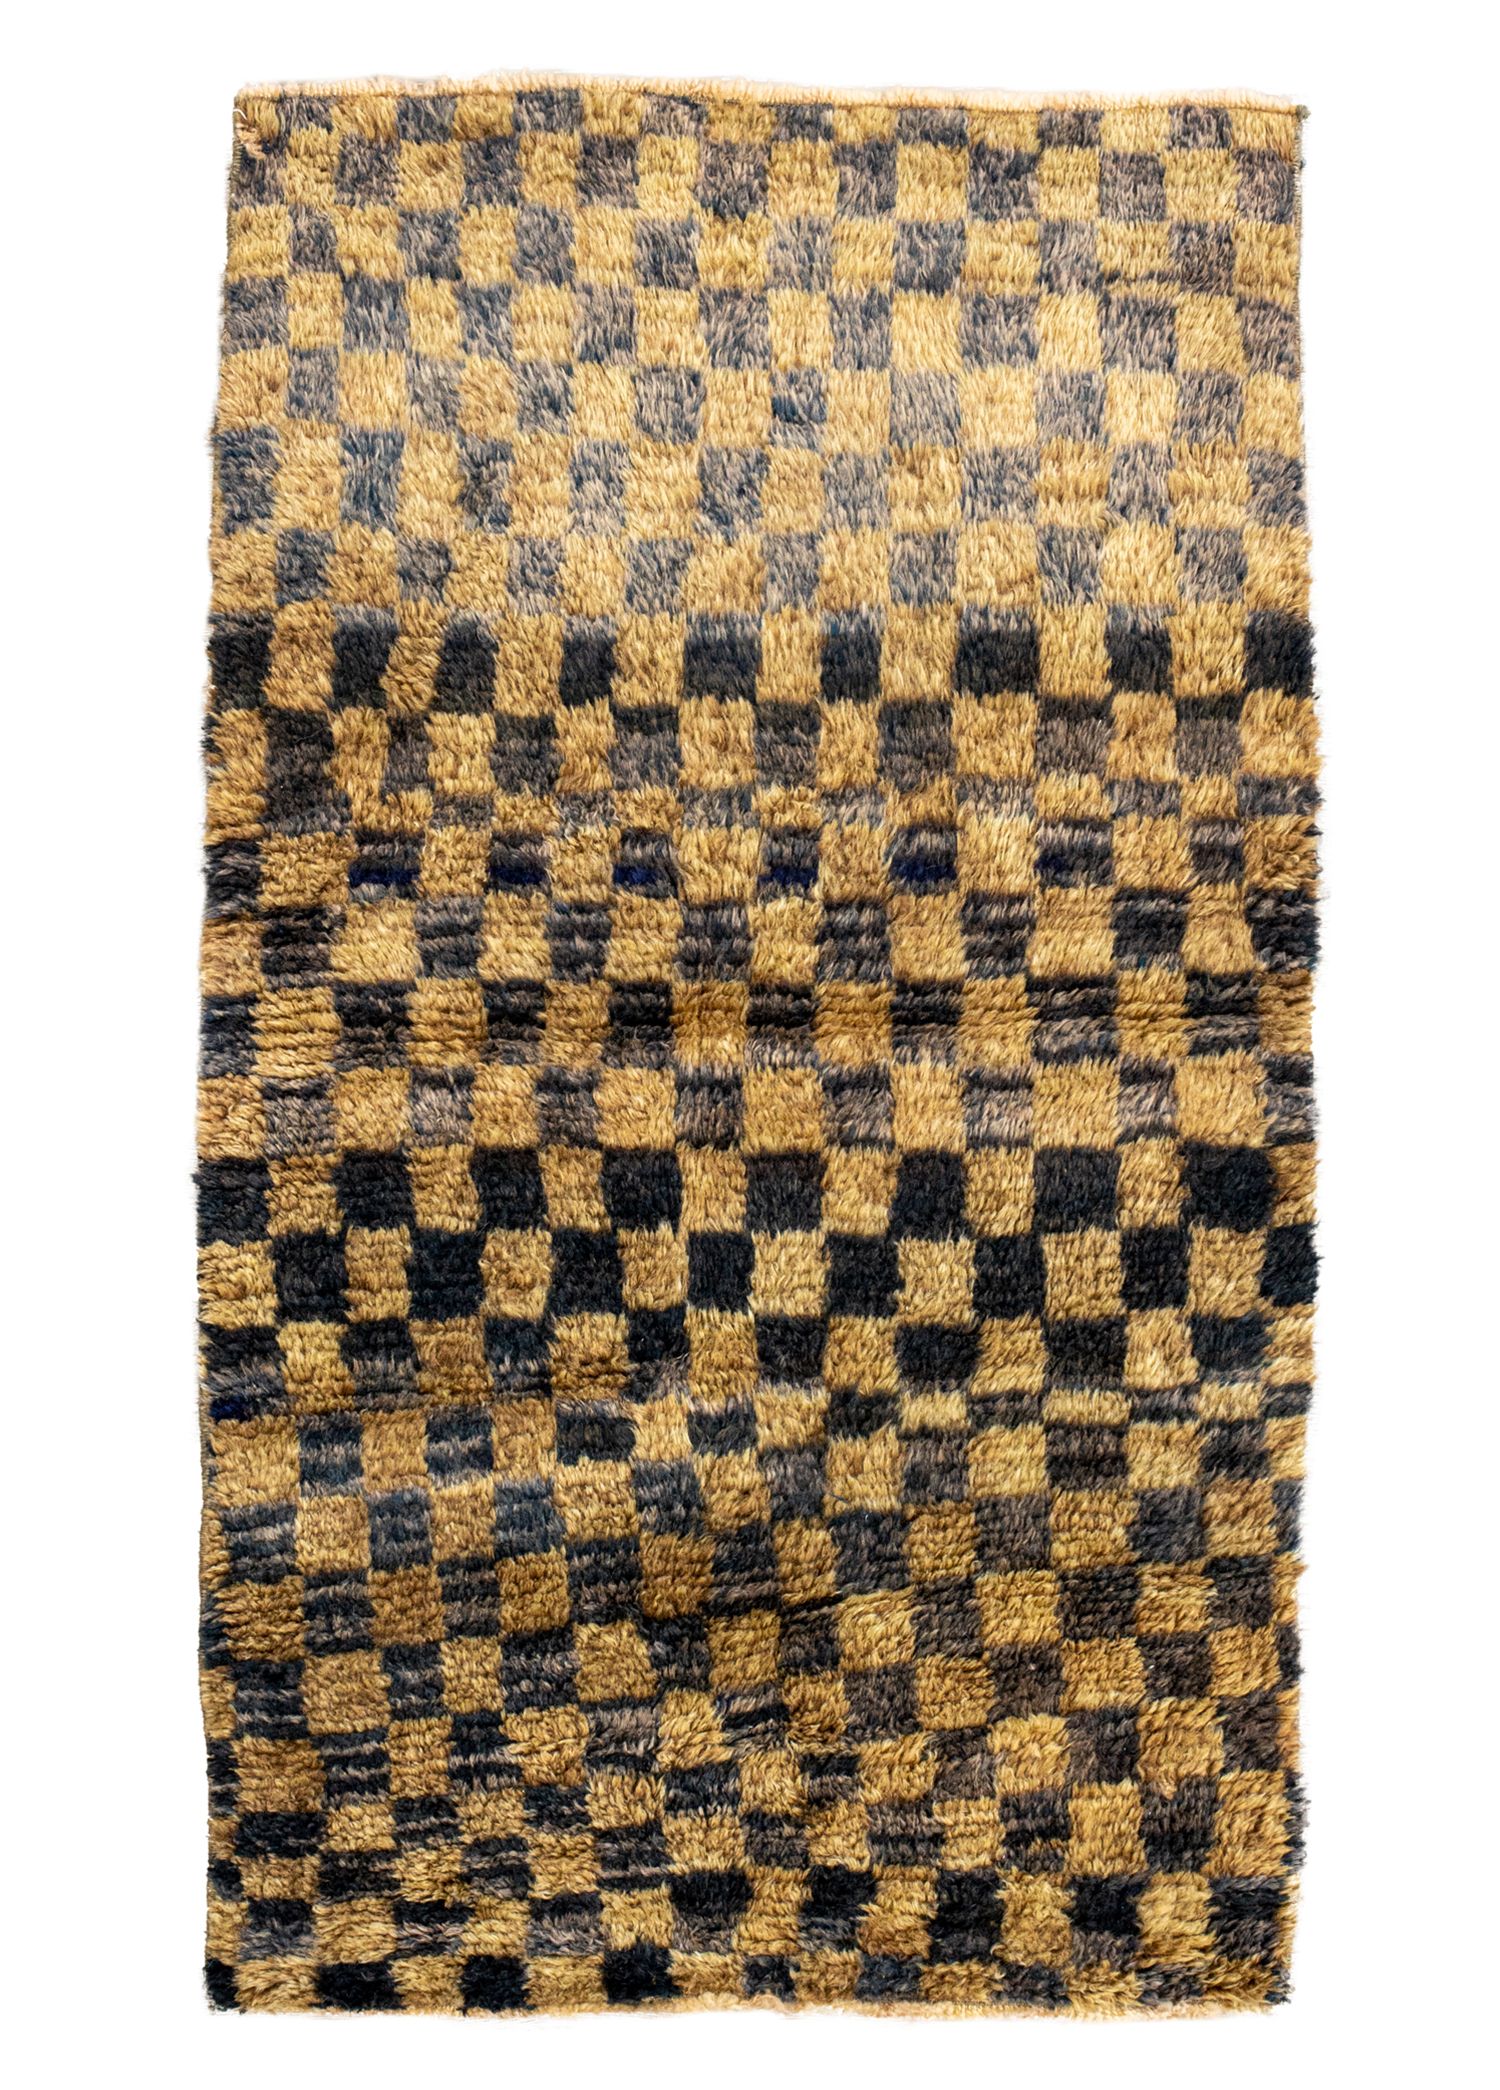 Efil Checkers Pattern Hand-Woven Soft Woolly Wool Rug 73x124 cm